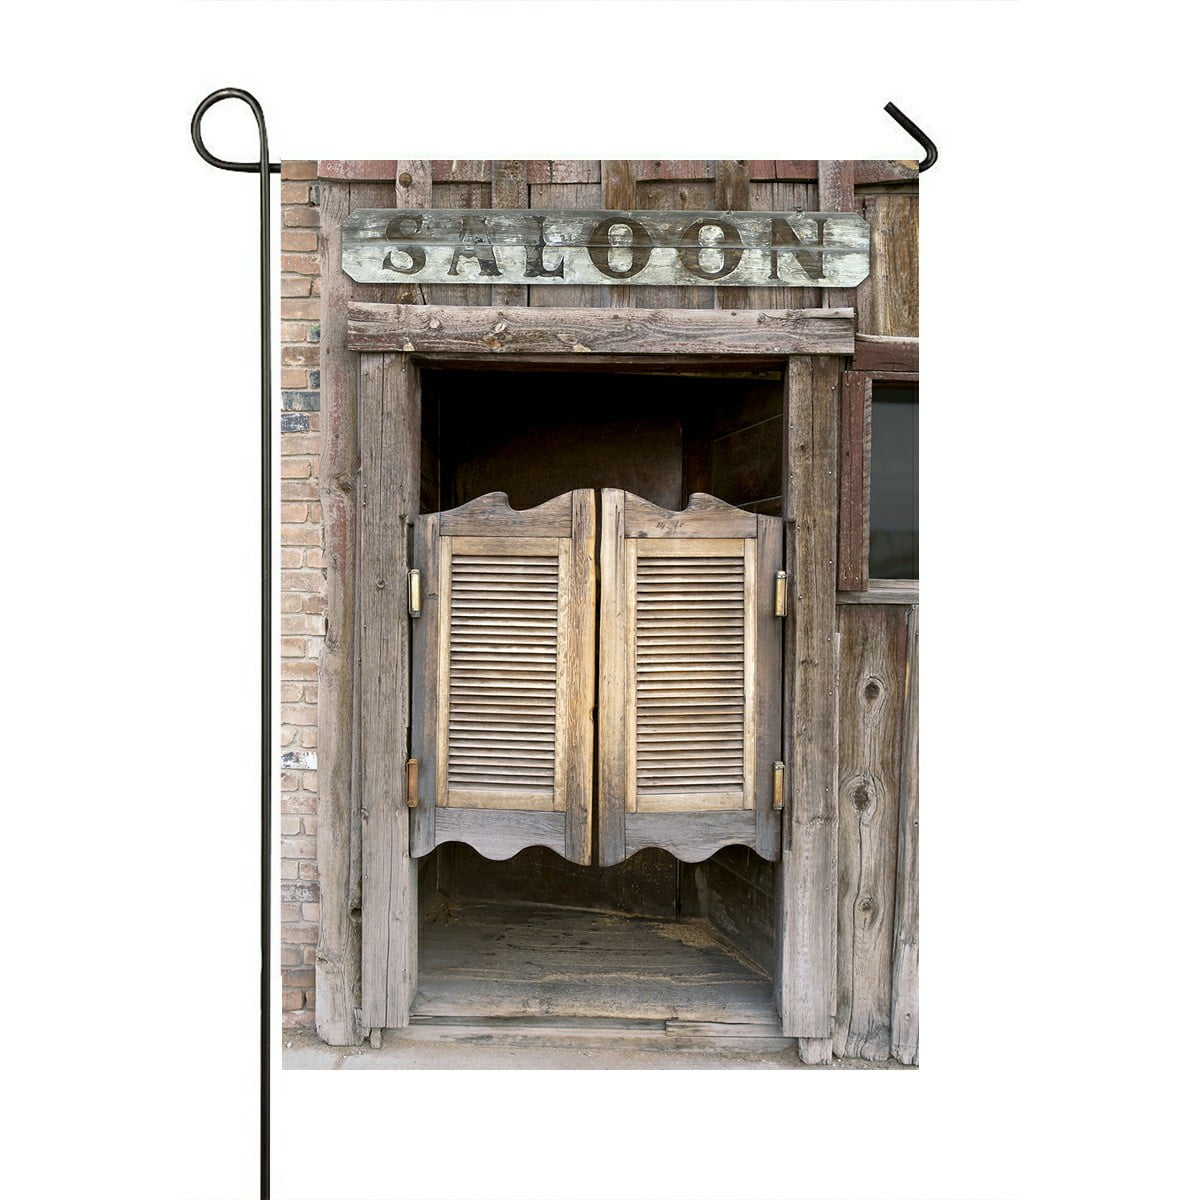 What was the purpose of 'saloon doors' and why did they not use a